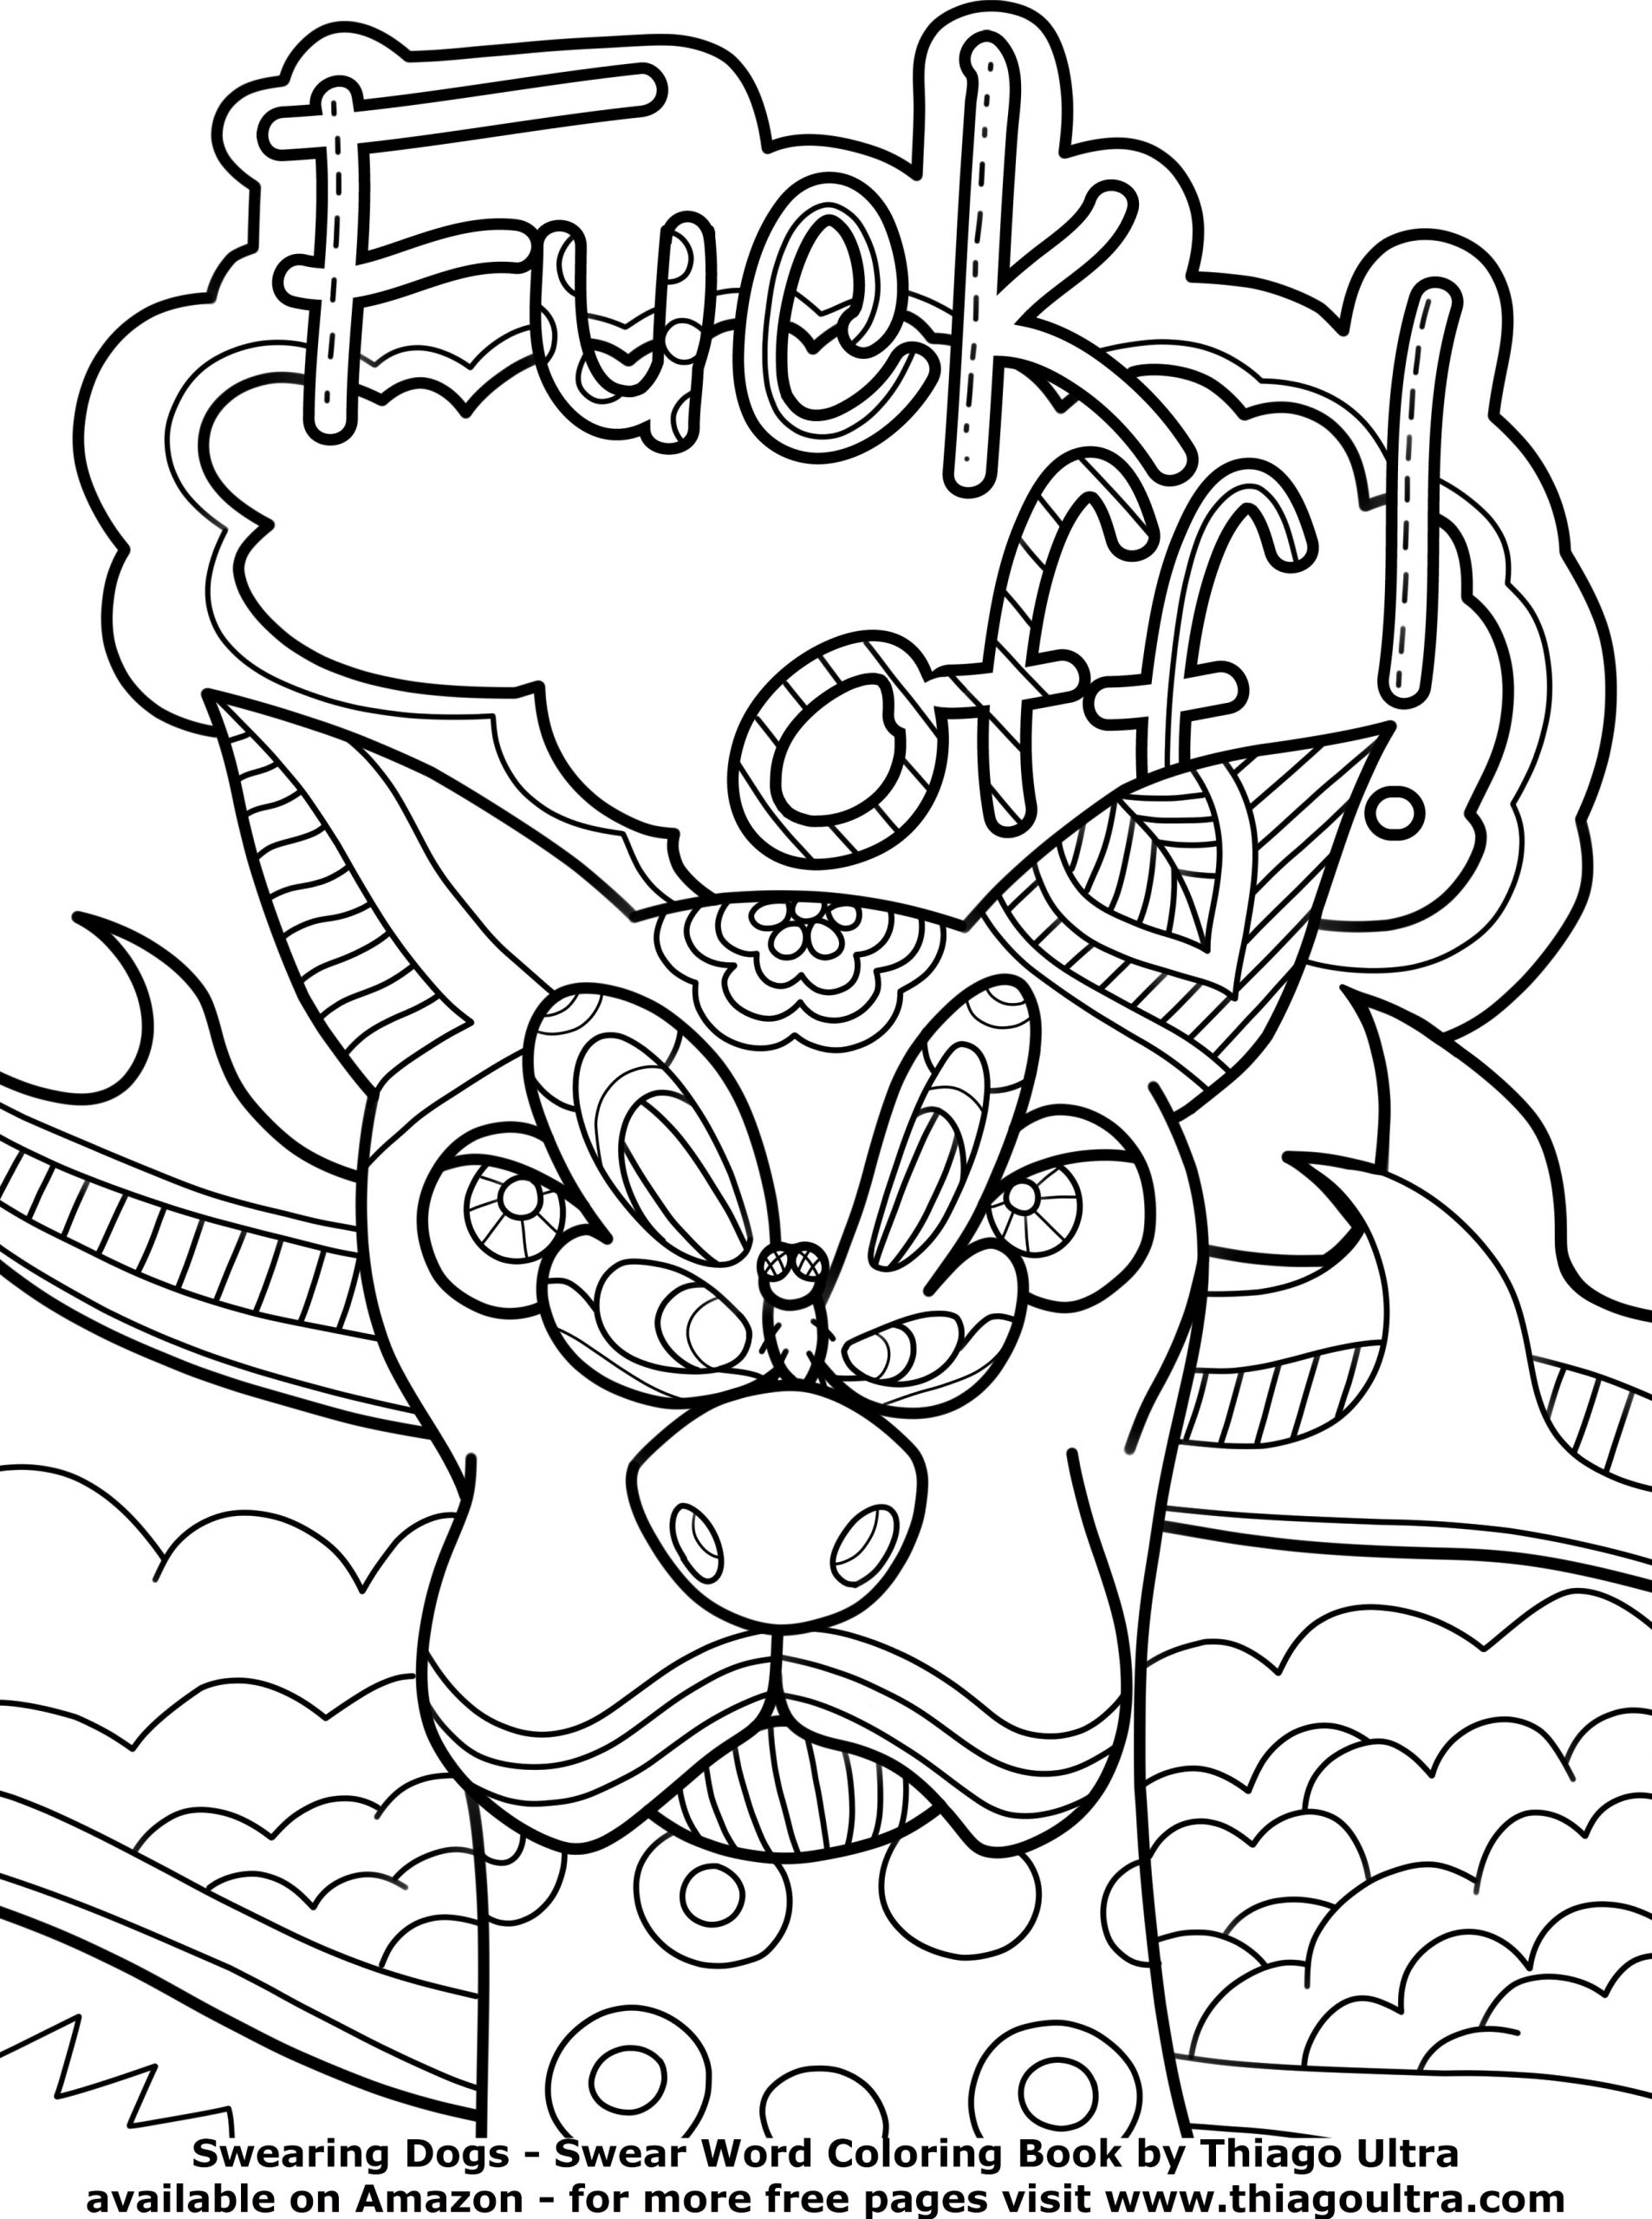 The 23 Best Ideas for Adult Coloring Pages Curse Words - Home, Family